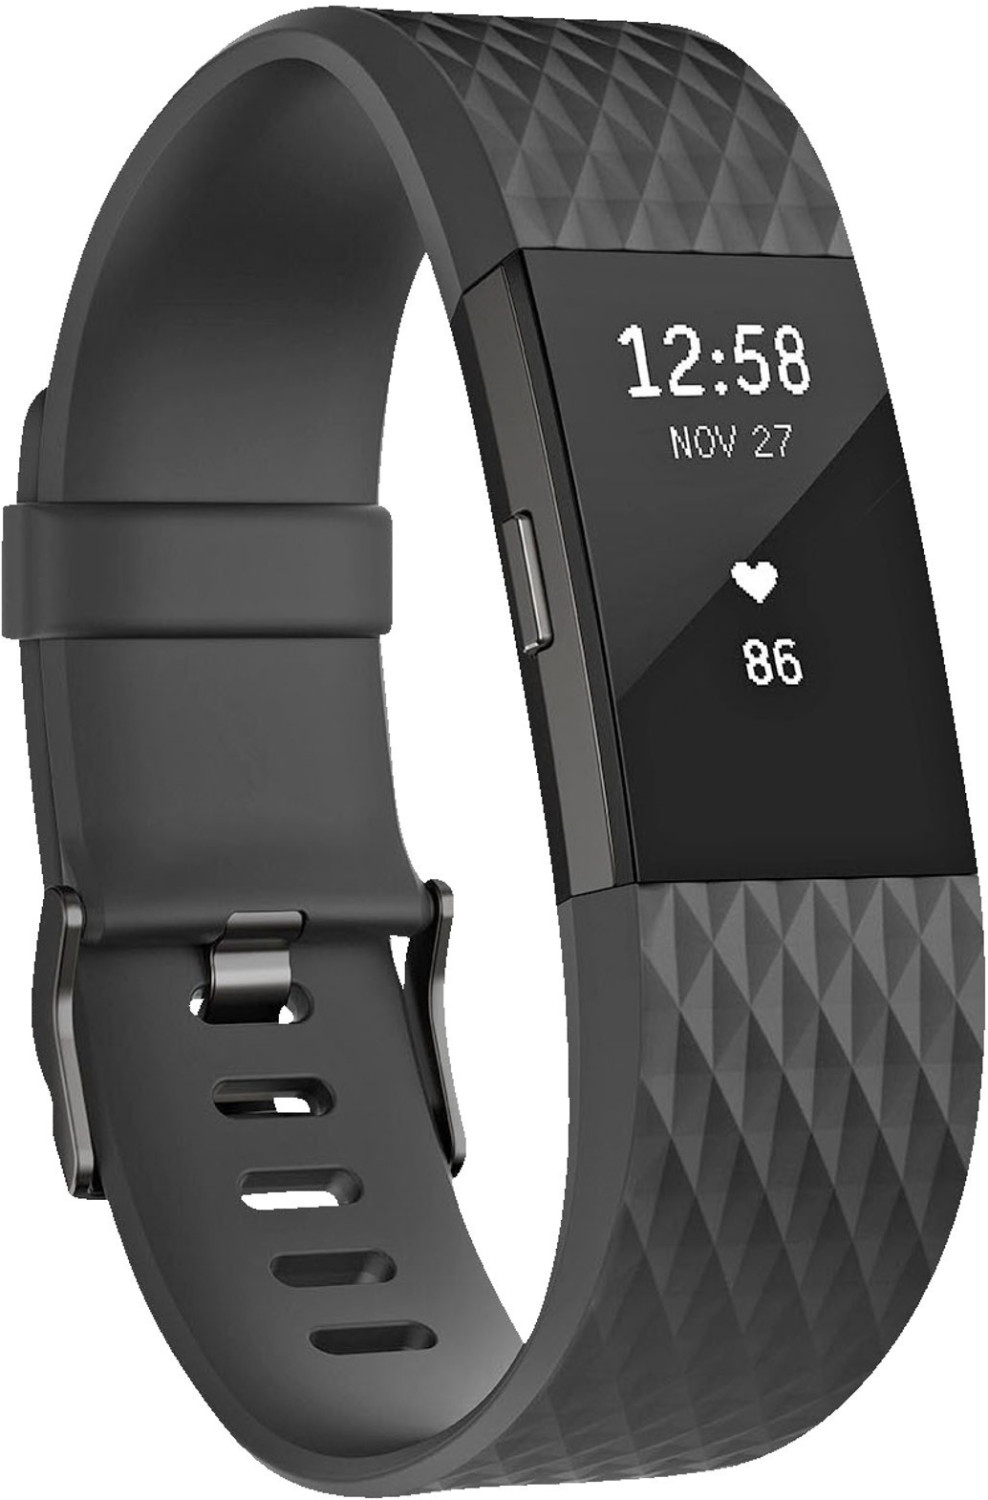 Buy Fitbit Charge 2 from £239.00 (Today) – Best Deals on idealo.co.uk